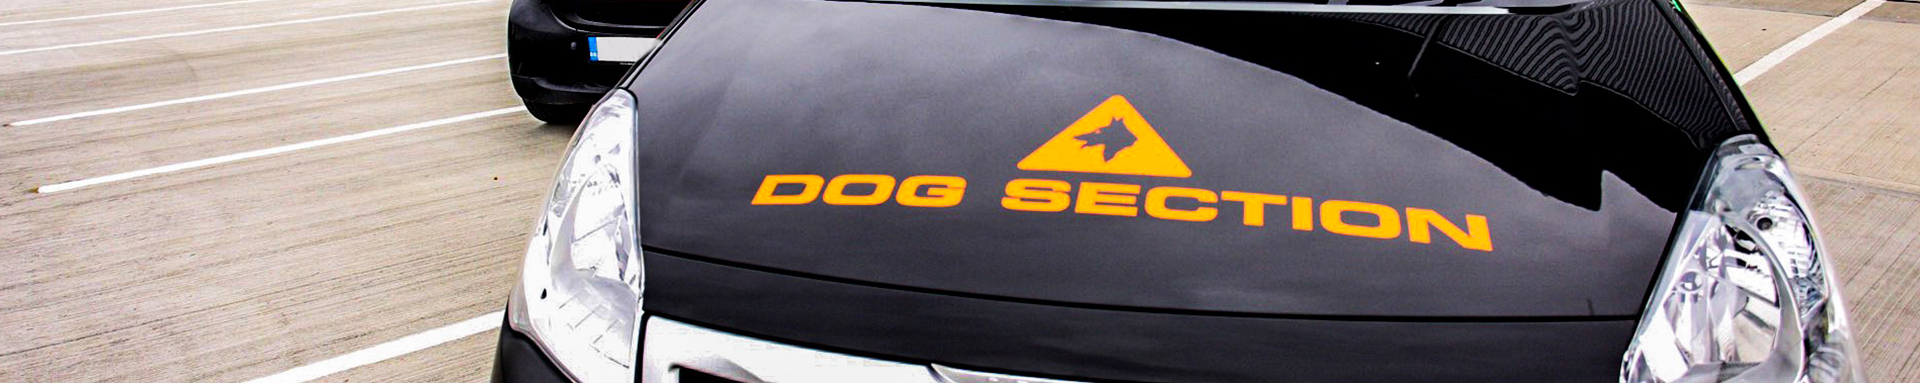 Sniffer Dogs UK